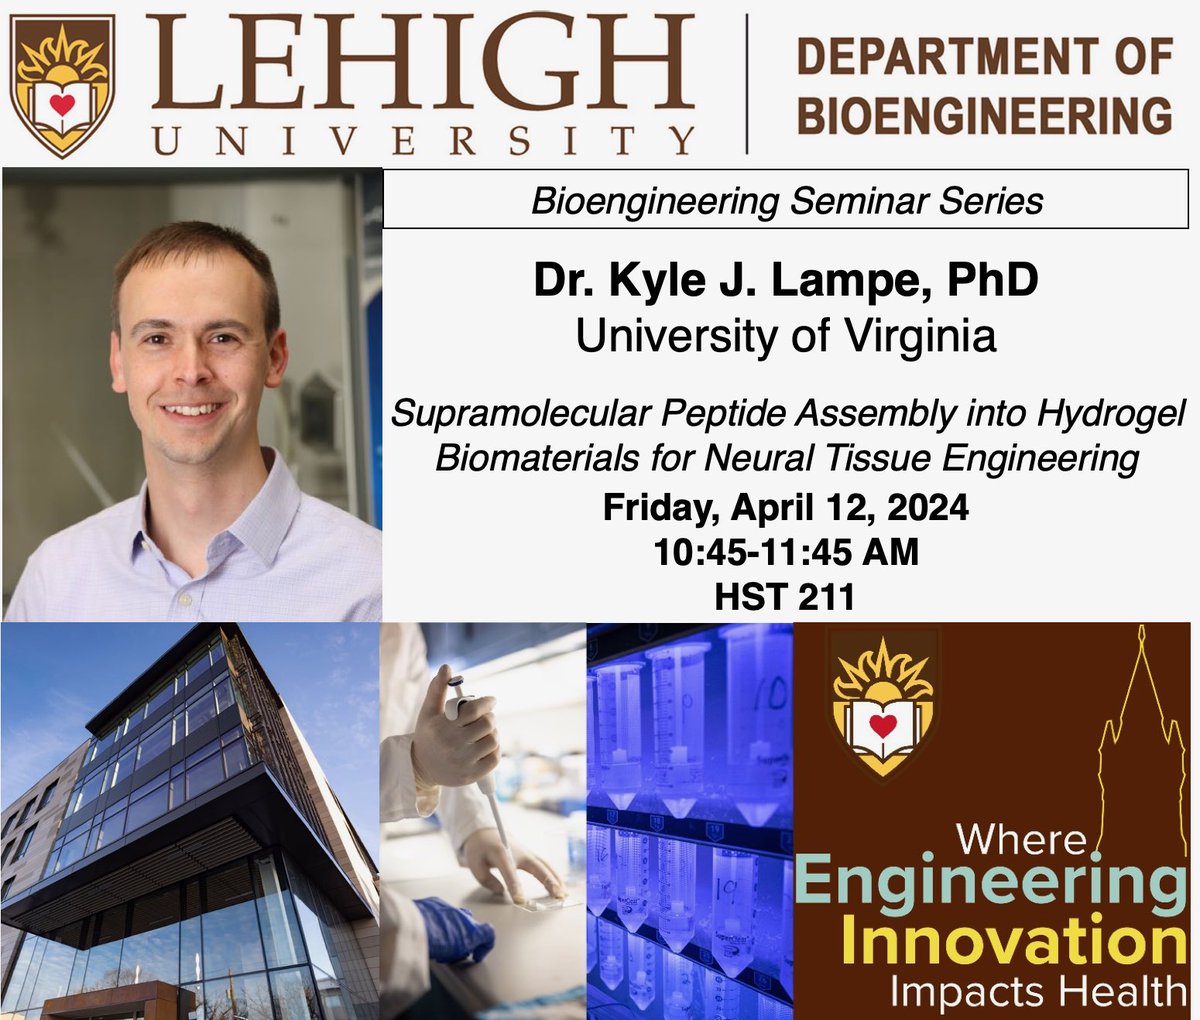 Delighted to host @Prof_Lampe this Friday 4/12 in our @LehighBioE seminar series! Excited to hear about his lab’s cool RAPID system for neural applications! @UVAEngineers #peptides #biomaterials @lehighengineers @LehighU